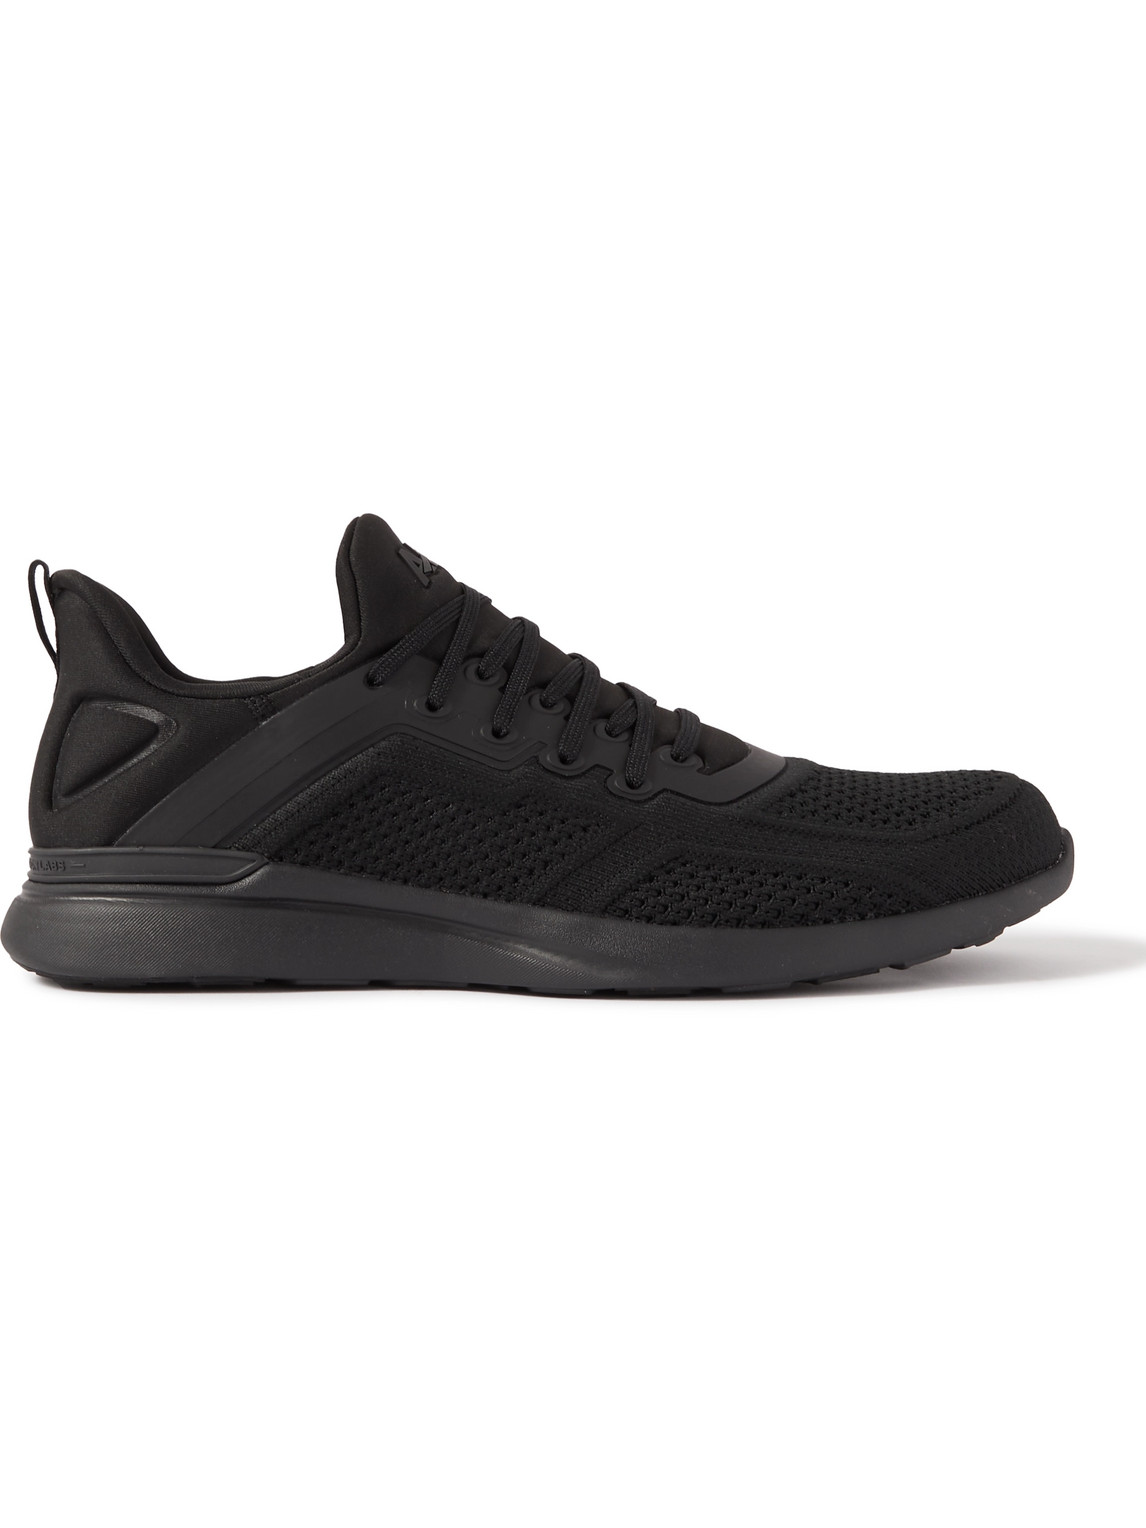 Apl Athletic Propulsion Labs Techloom Tracer Running Trainers In Black